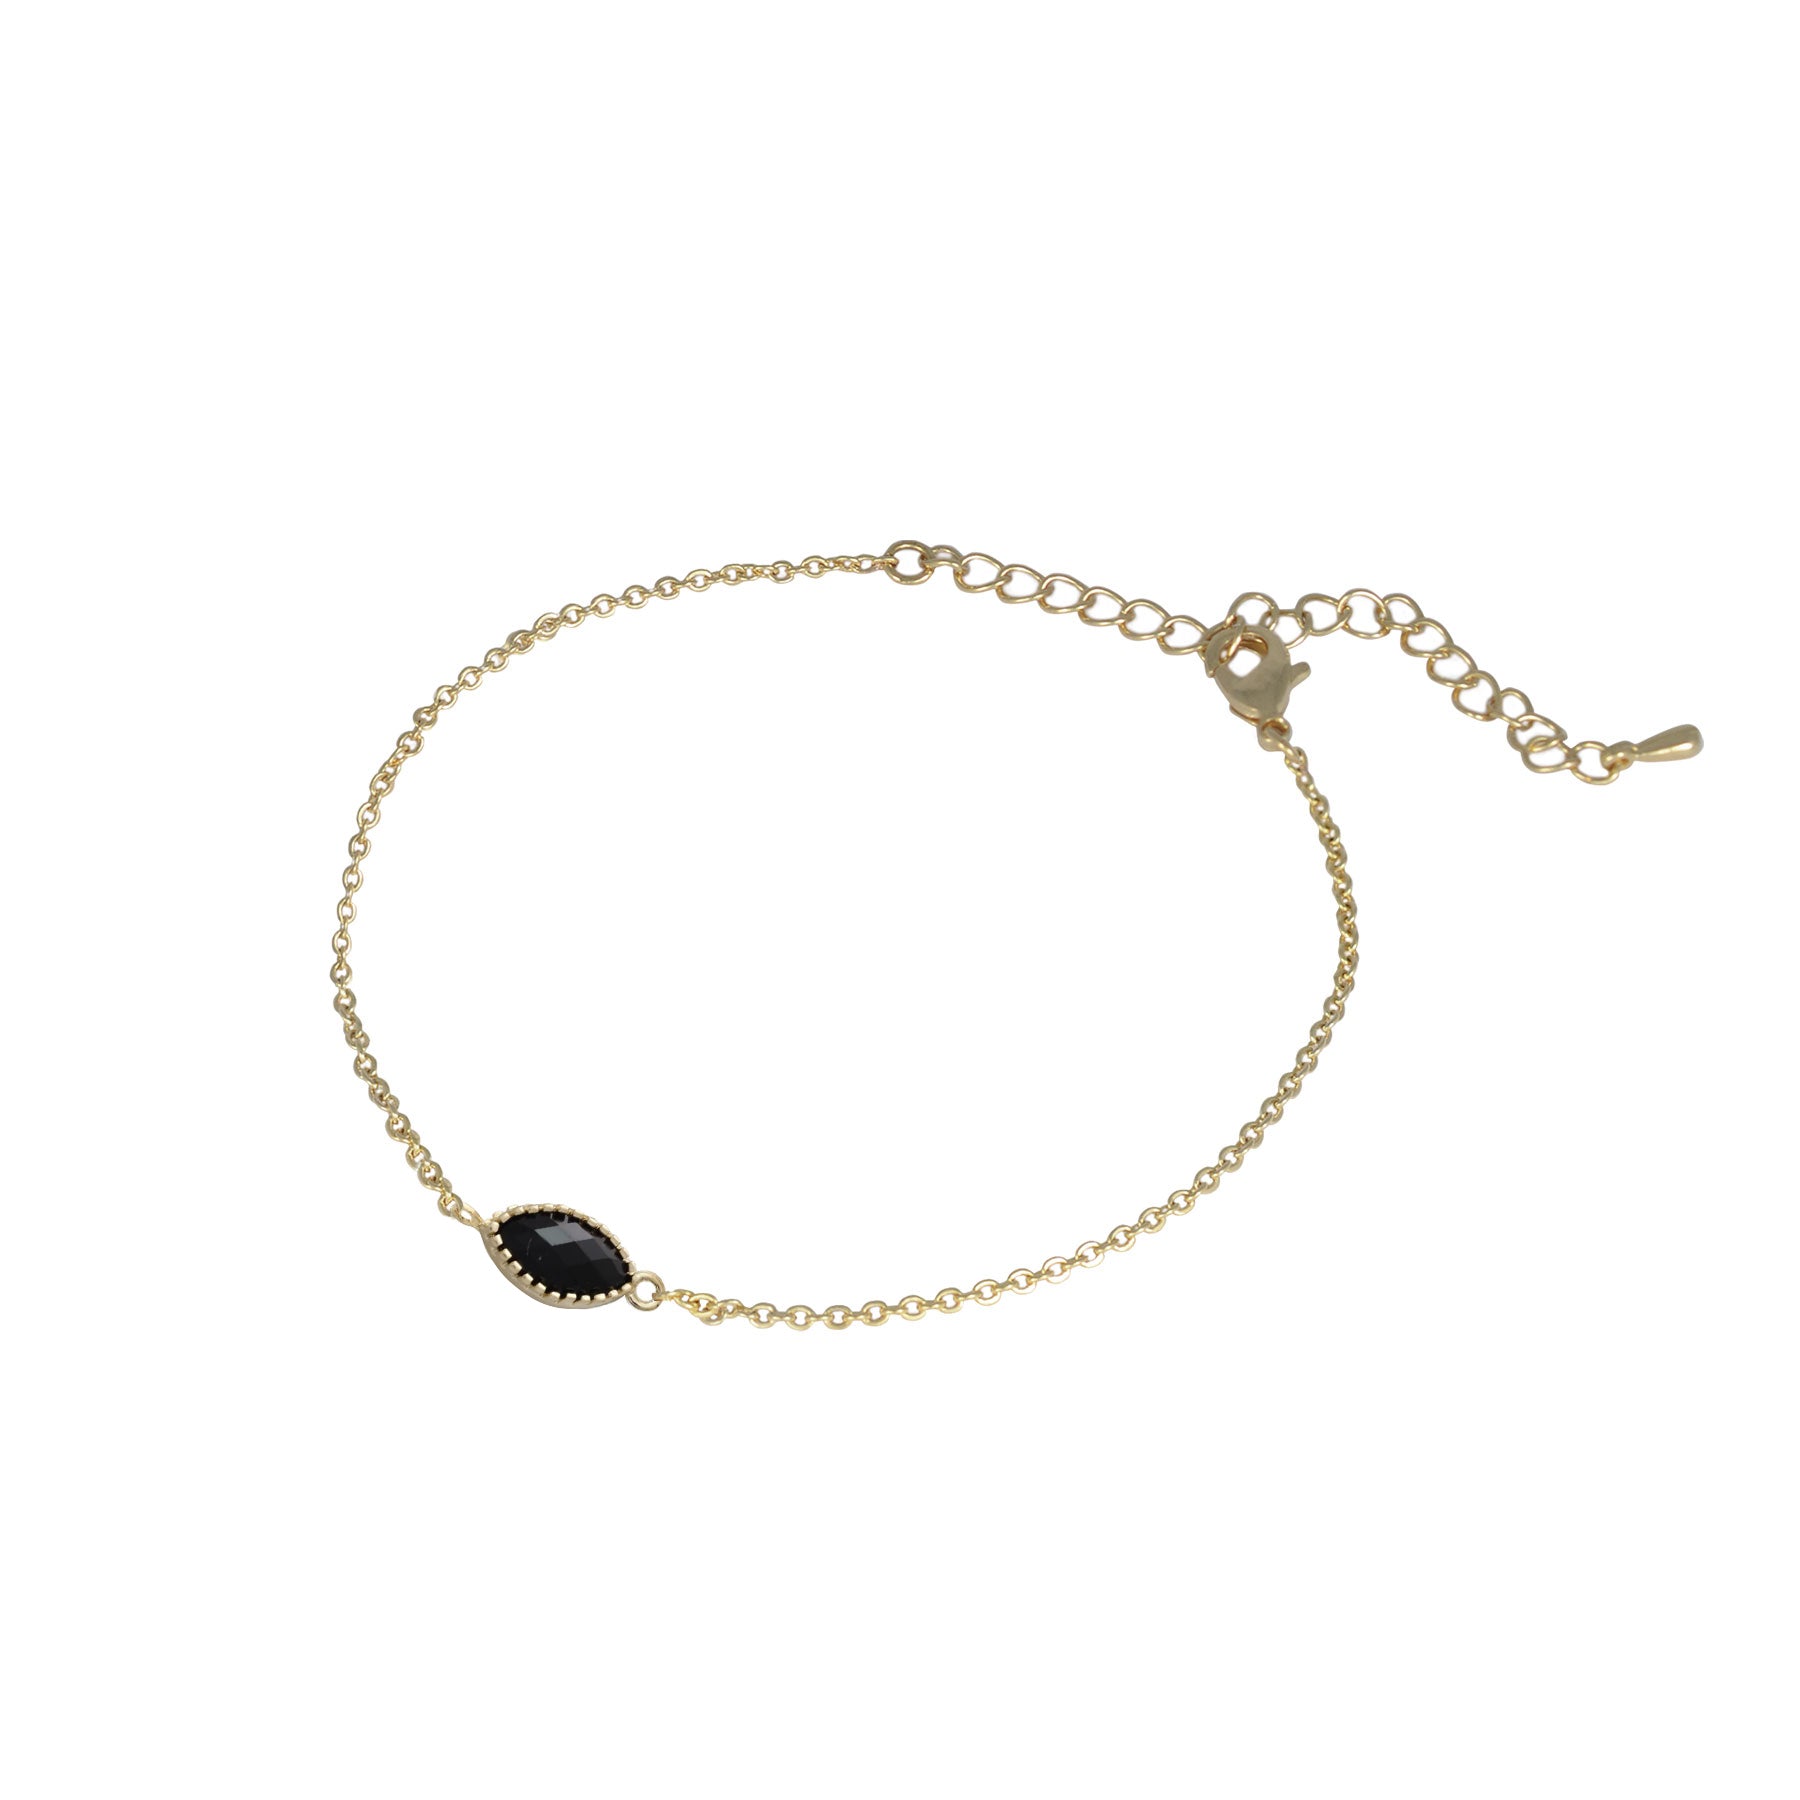 Gold and black marquise bracelet